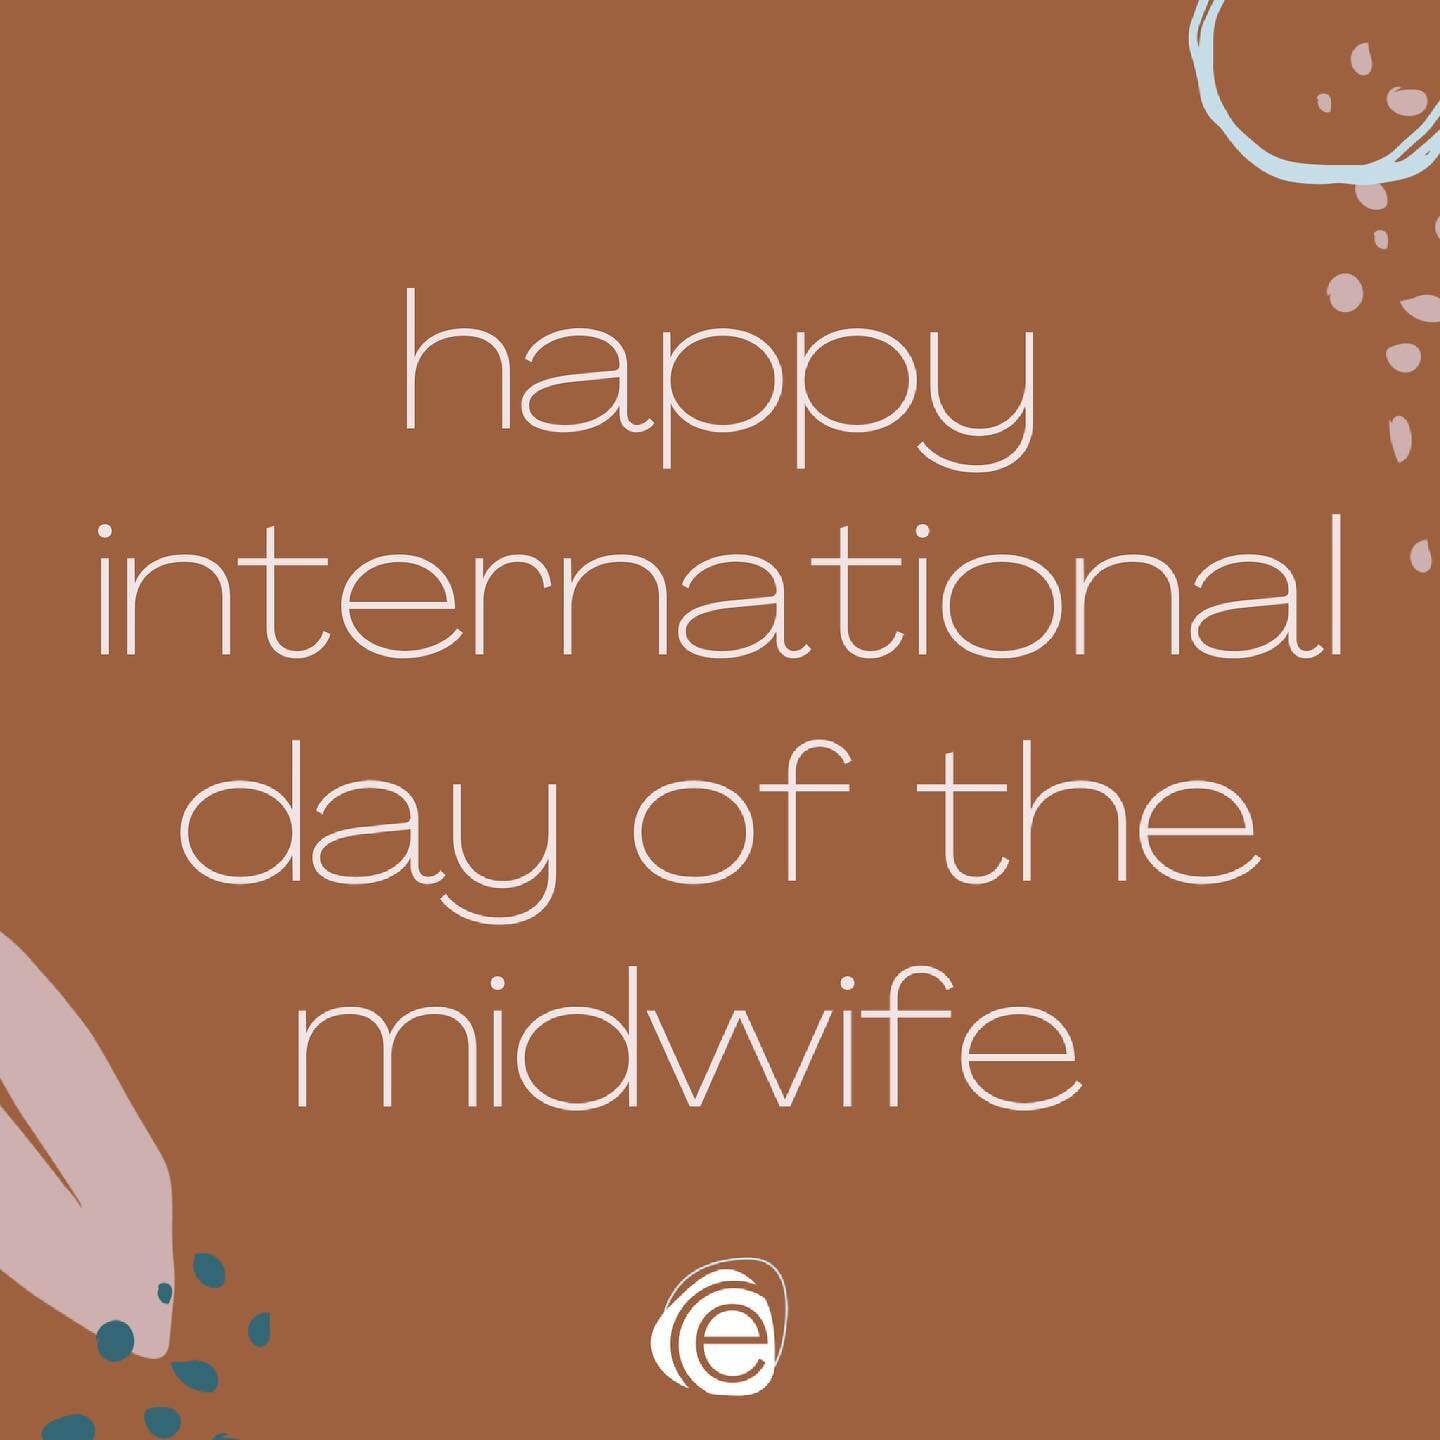 a huge shout out to all the amazing midwives i&rsquo;ve had the absolute pleasure of working with over the years. 
thank you for nurturing my love of obstetrics, celebrating the joys and supporting me through those very tough moments. i would be comp